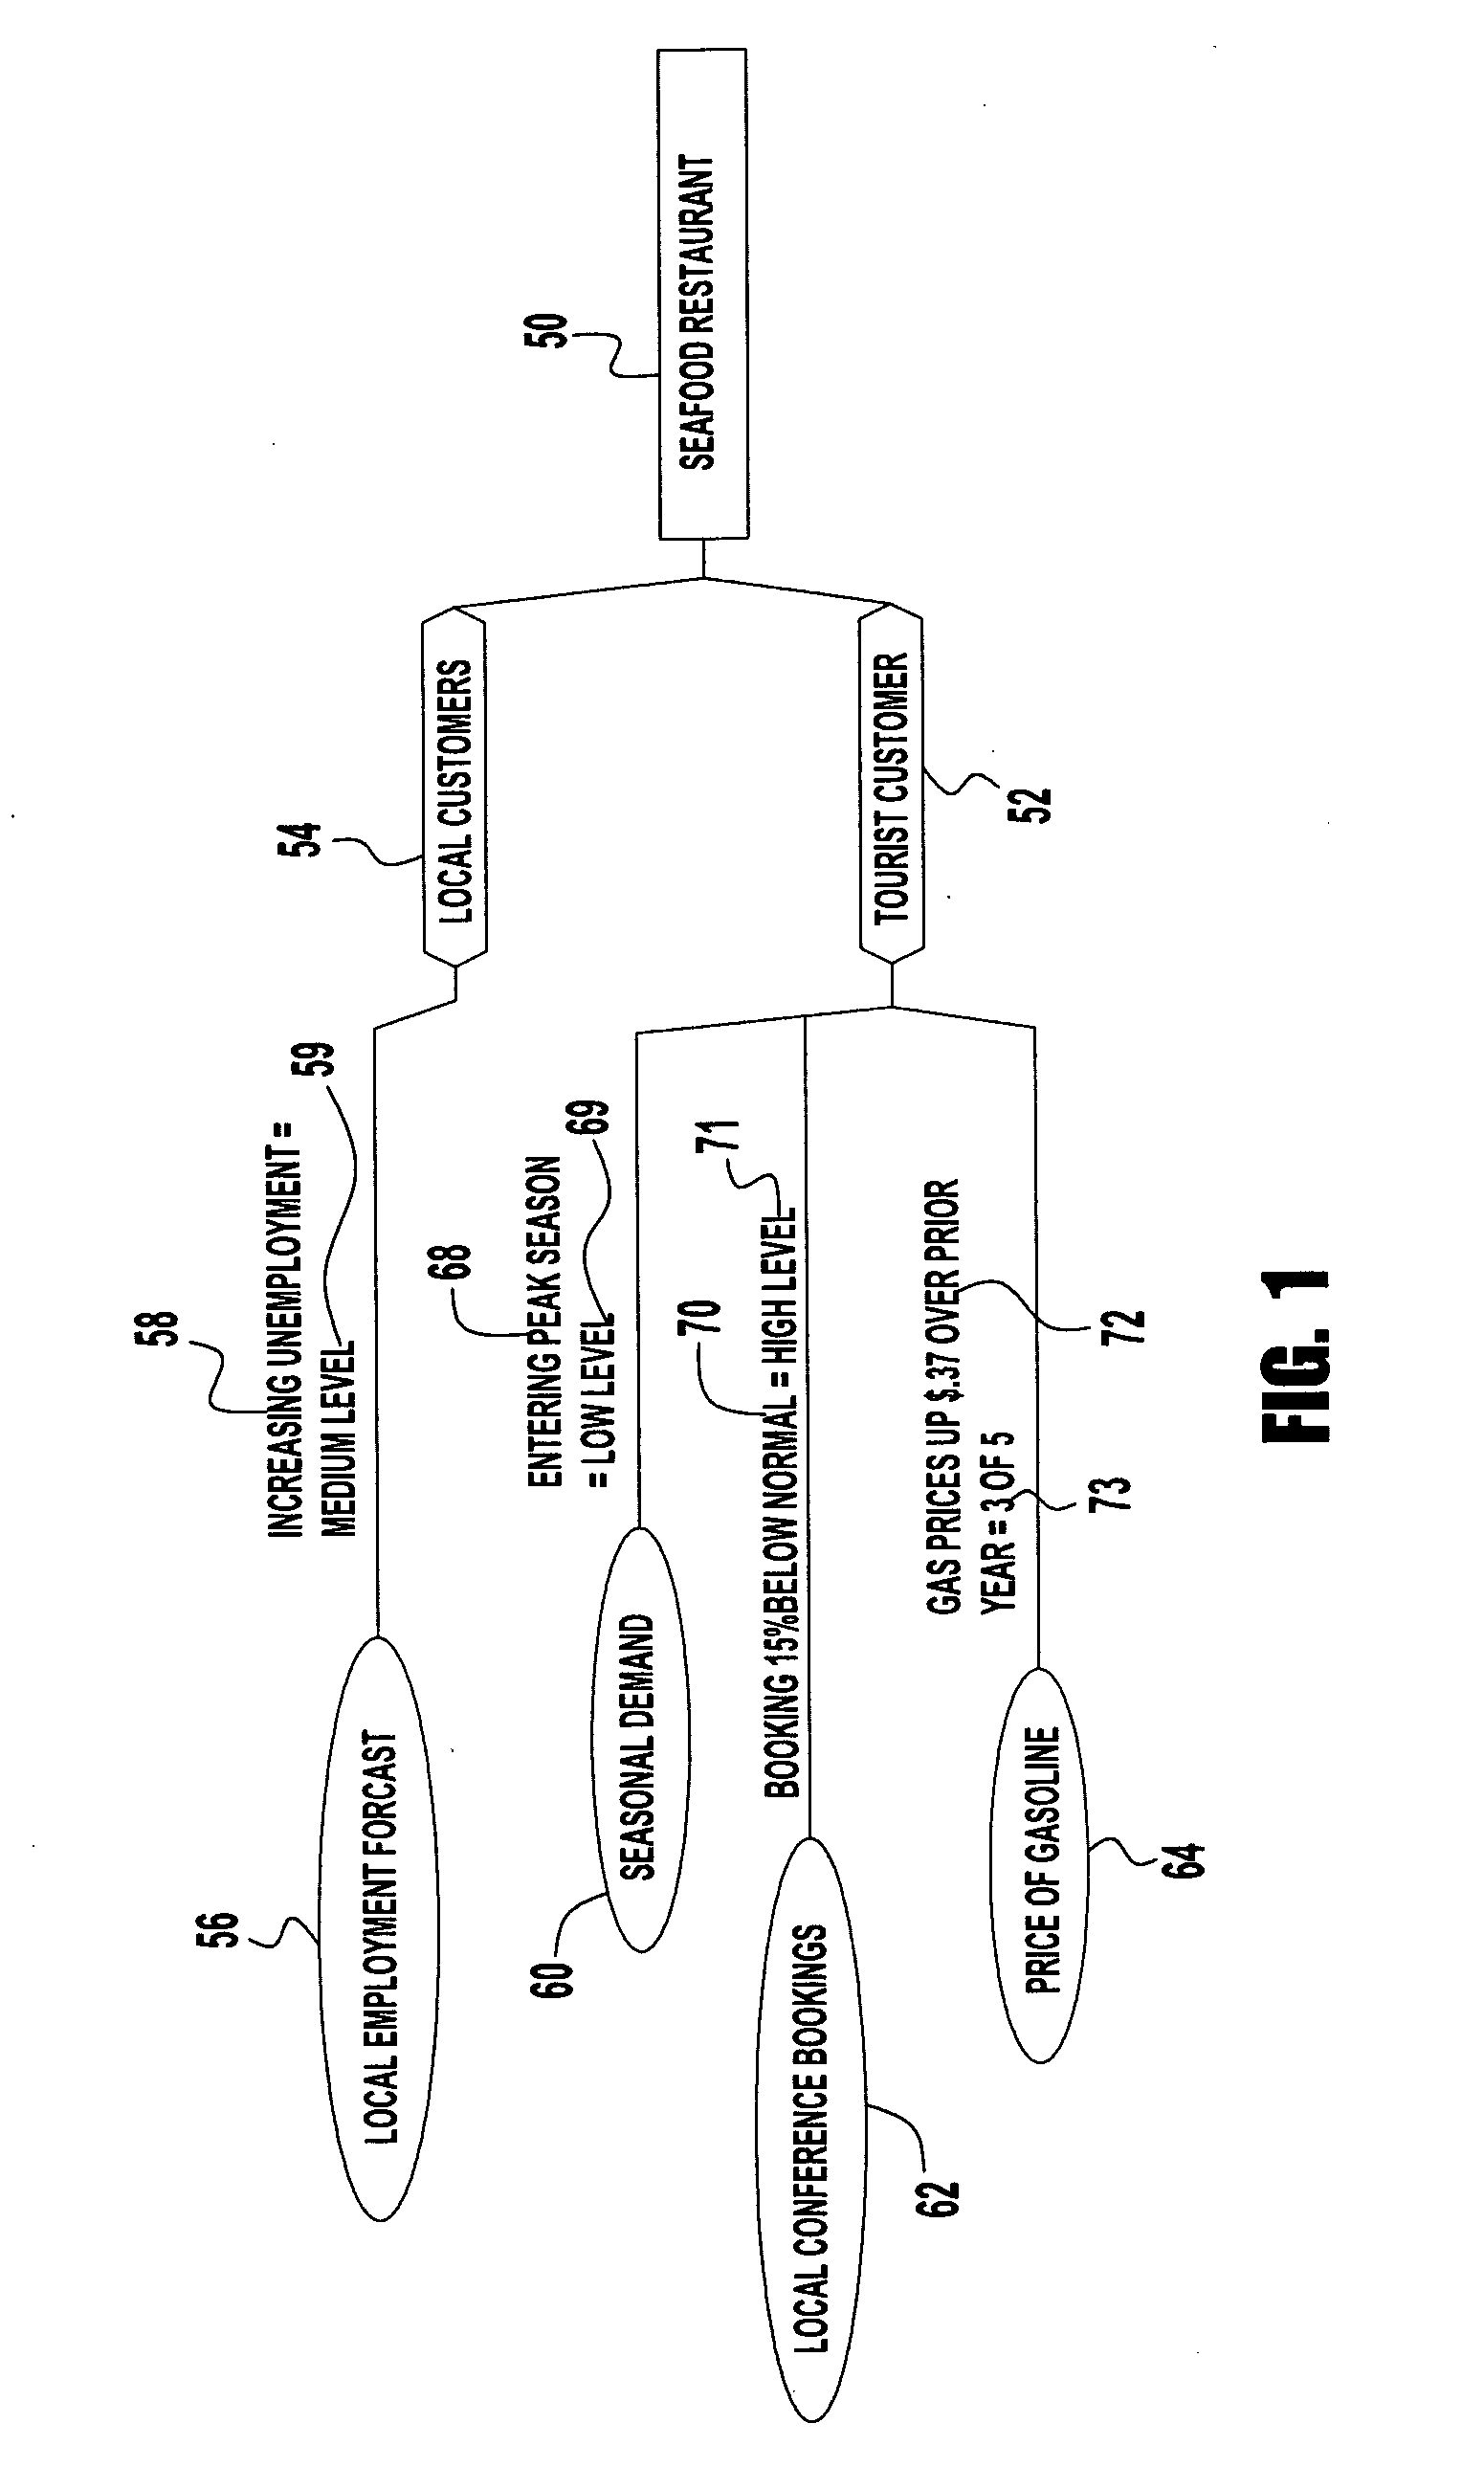 Method and system for risk evaluation and management